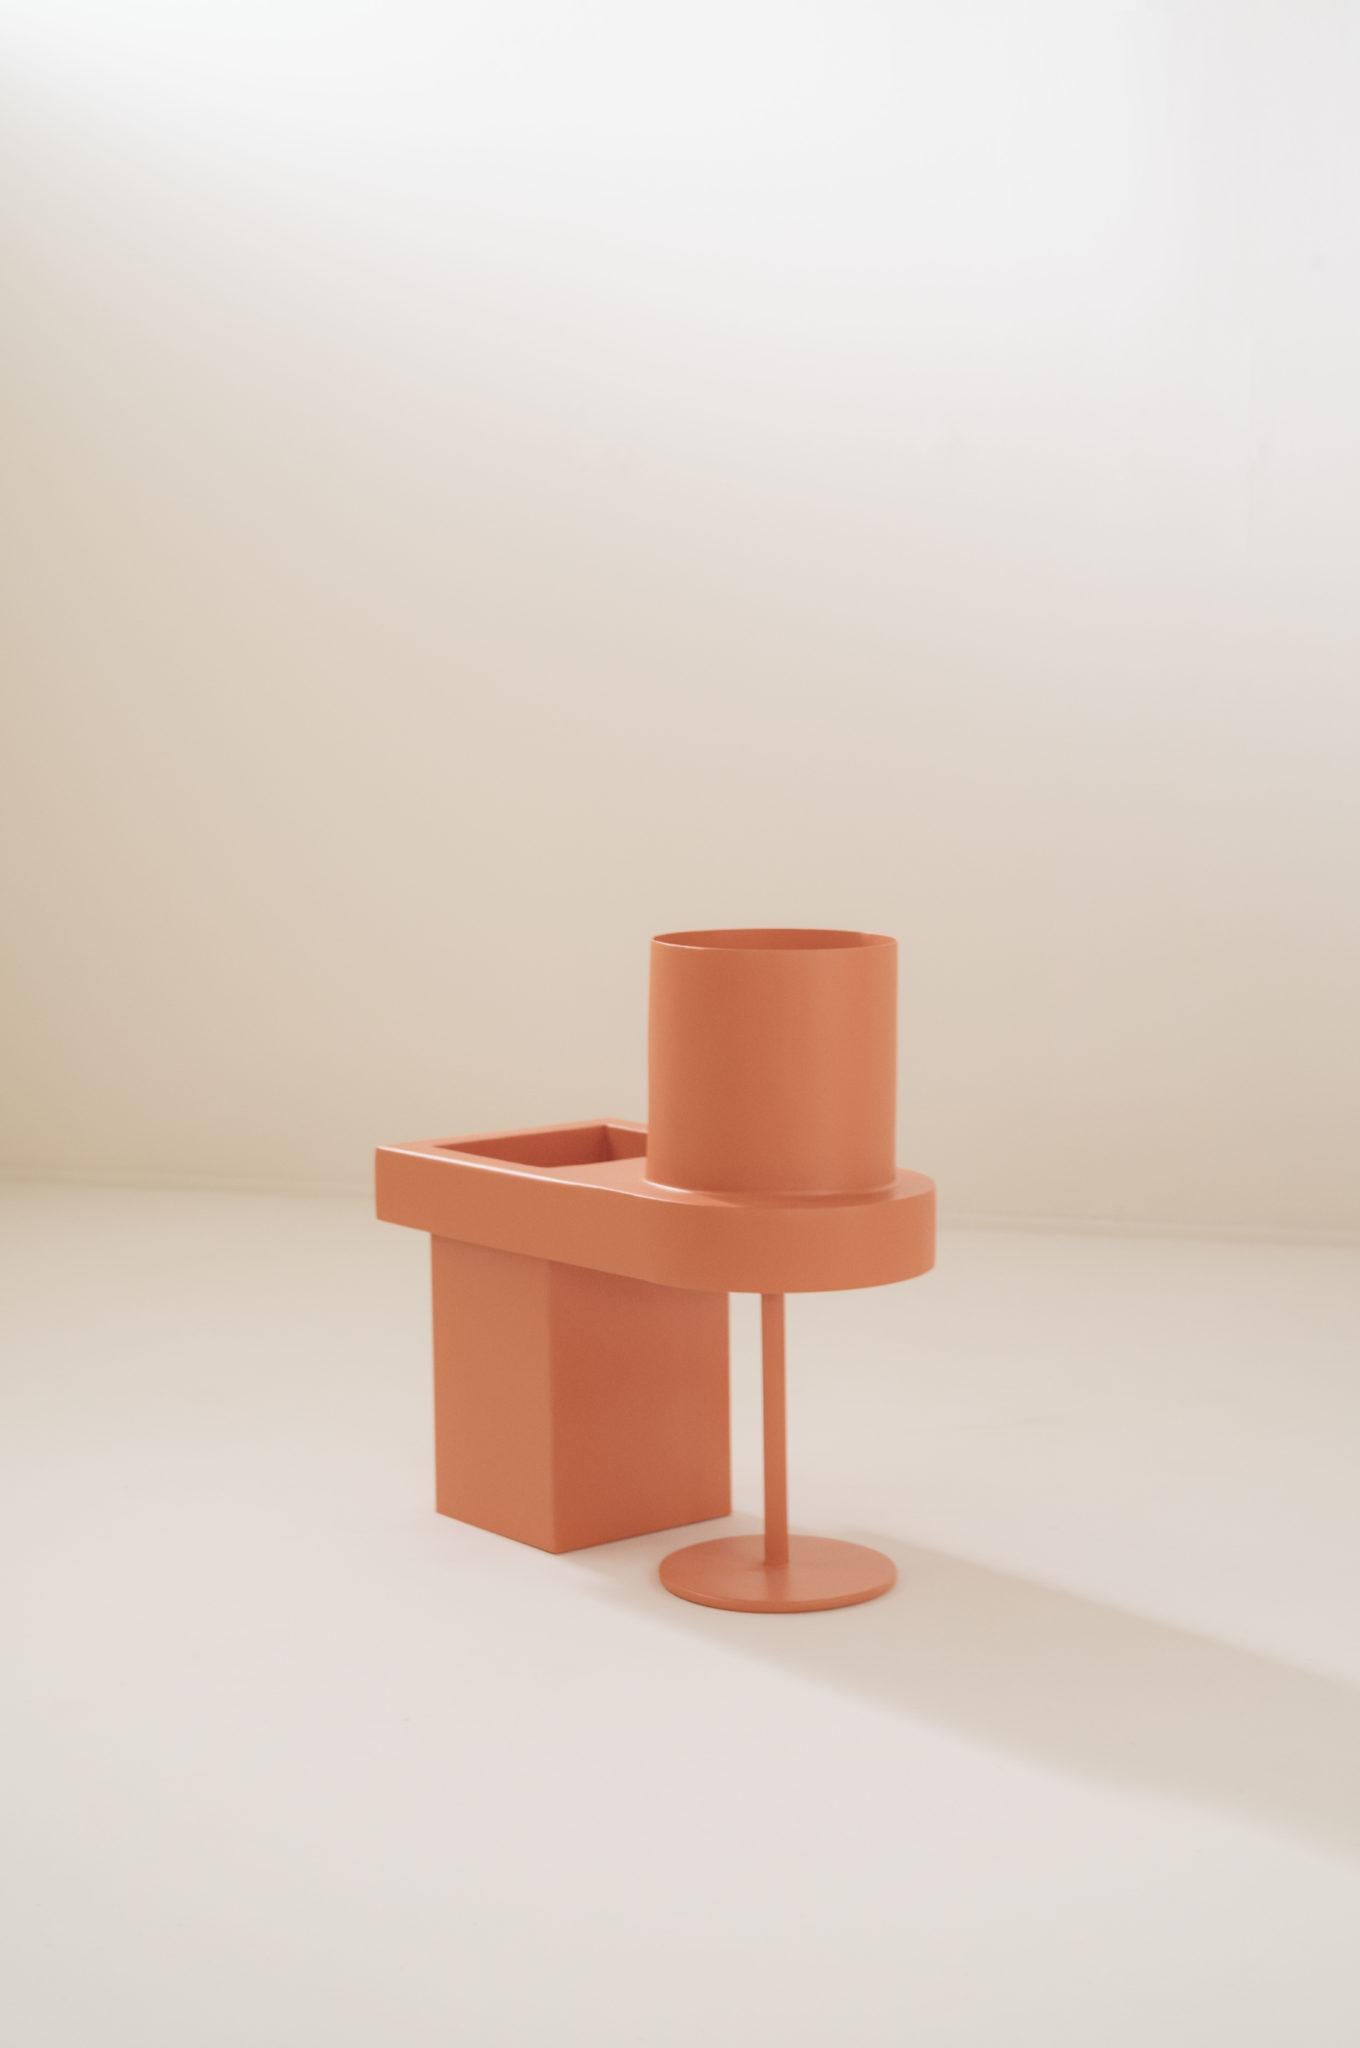 Post-modern sculpture Brutante E in terracotta lacquered metal handmade in Panama by Fi.

Brutantes presents a series of functional sculptural objects created from the mixture, abstraction and transmutation between everyday artifacts and brutalism,